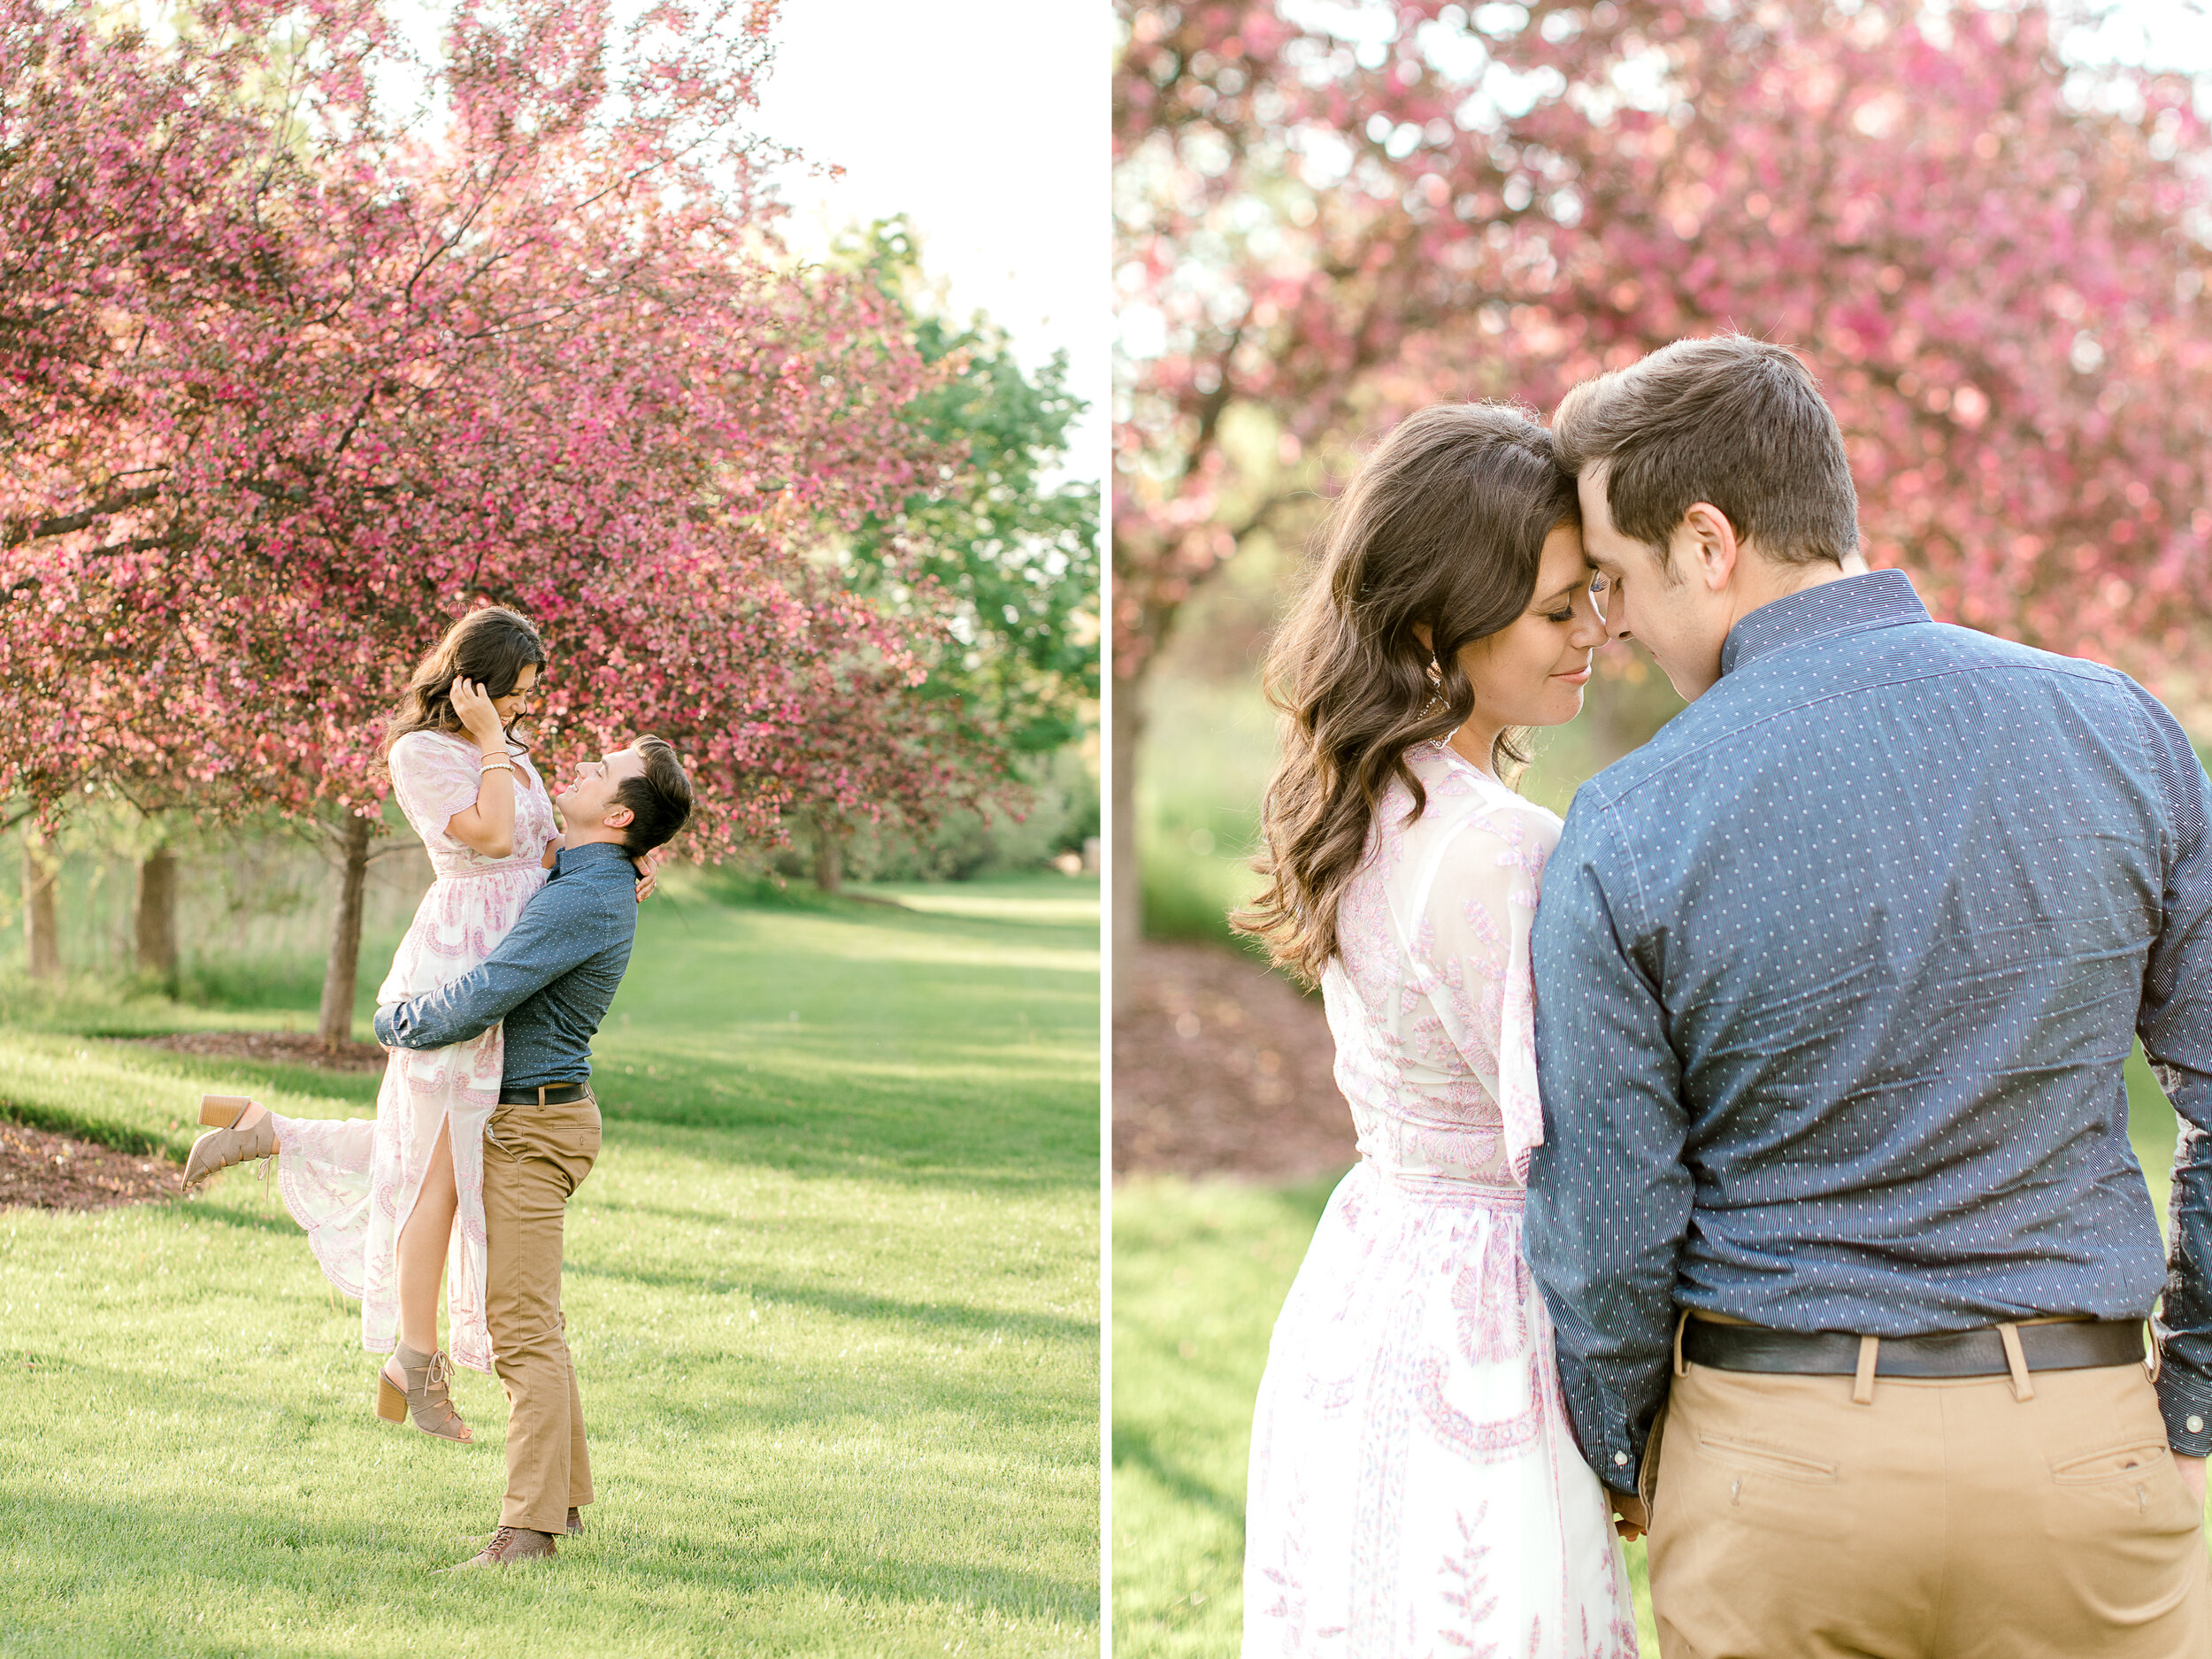 Spring Engagement Session in Michigan | Engagement Session with a Puppy | Light &amp; Airy Fine Art Michigan Wedding Photographer